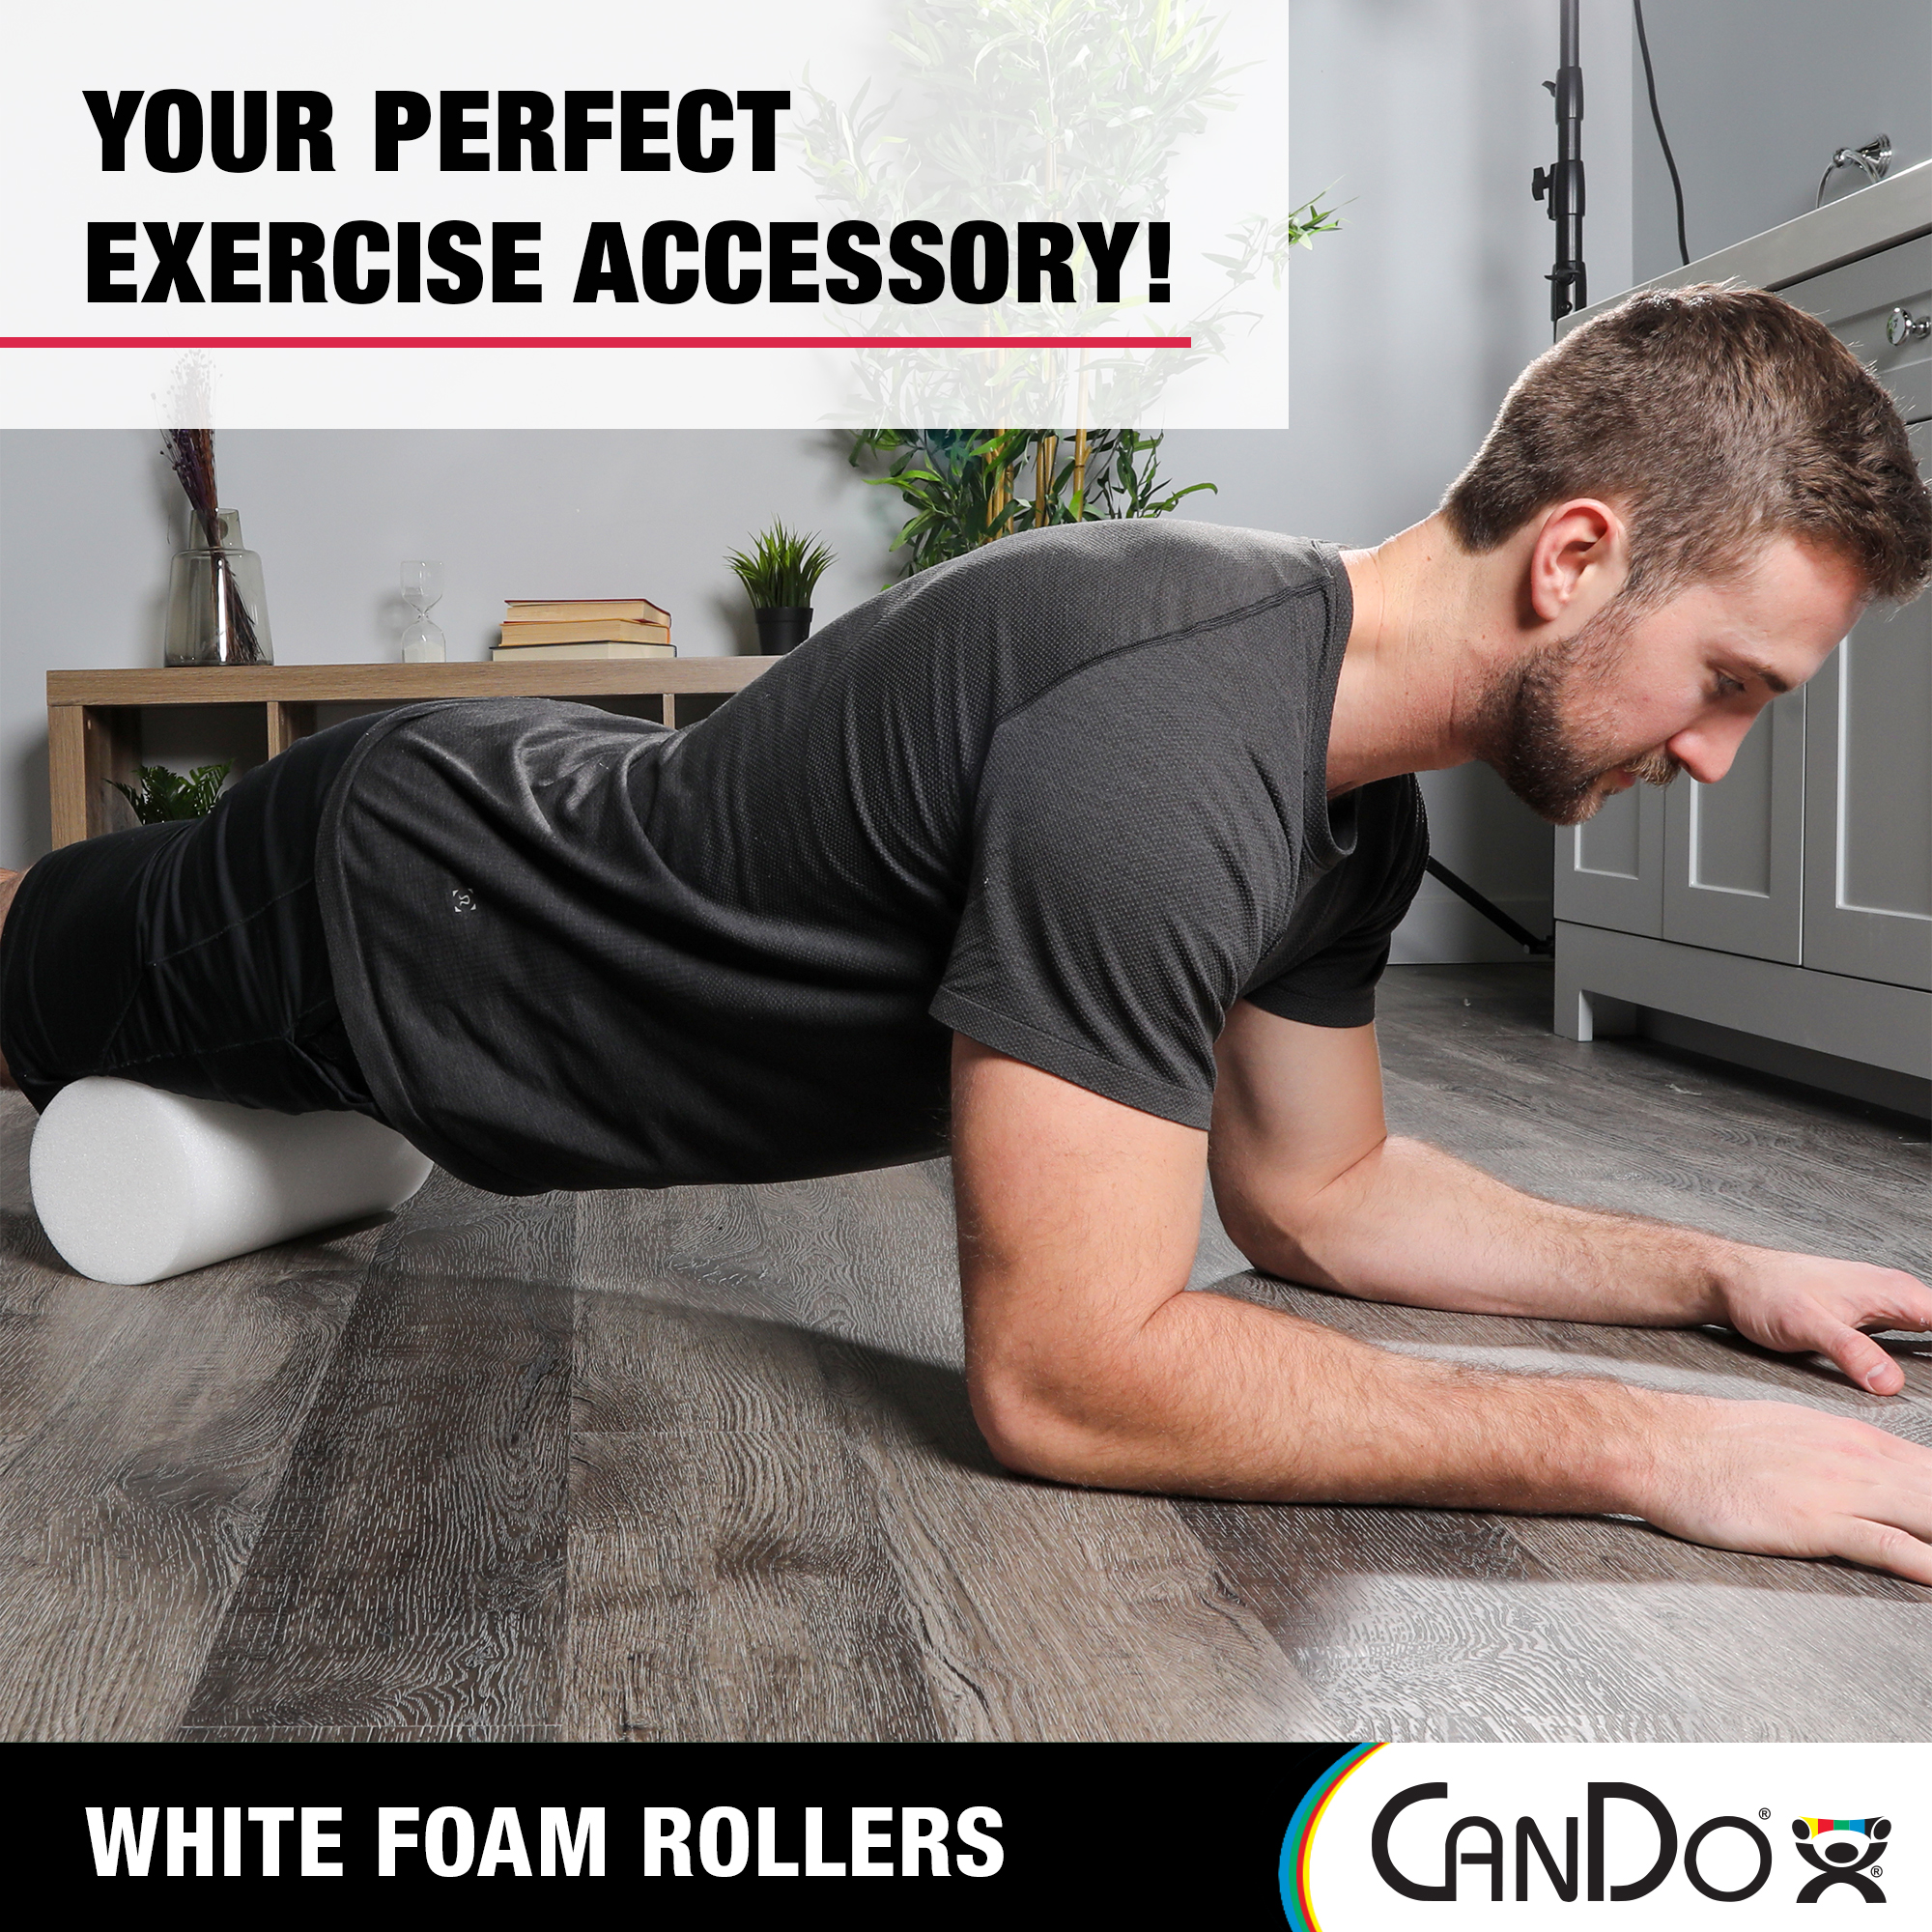 CanDo White PE Foam Rollers for Exercise, Finess, Muscle Restoration, Massage Therapy, Sport Recovery and Physical Therapy for Home, Clinics, Professional Therapy Round 6" x 36" - image 3 of 6